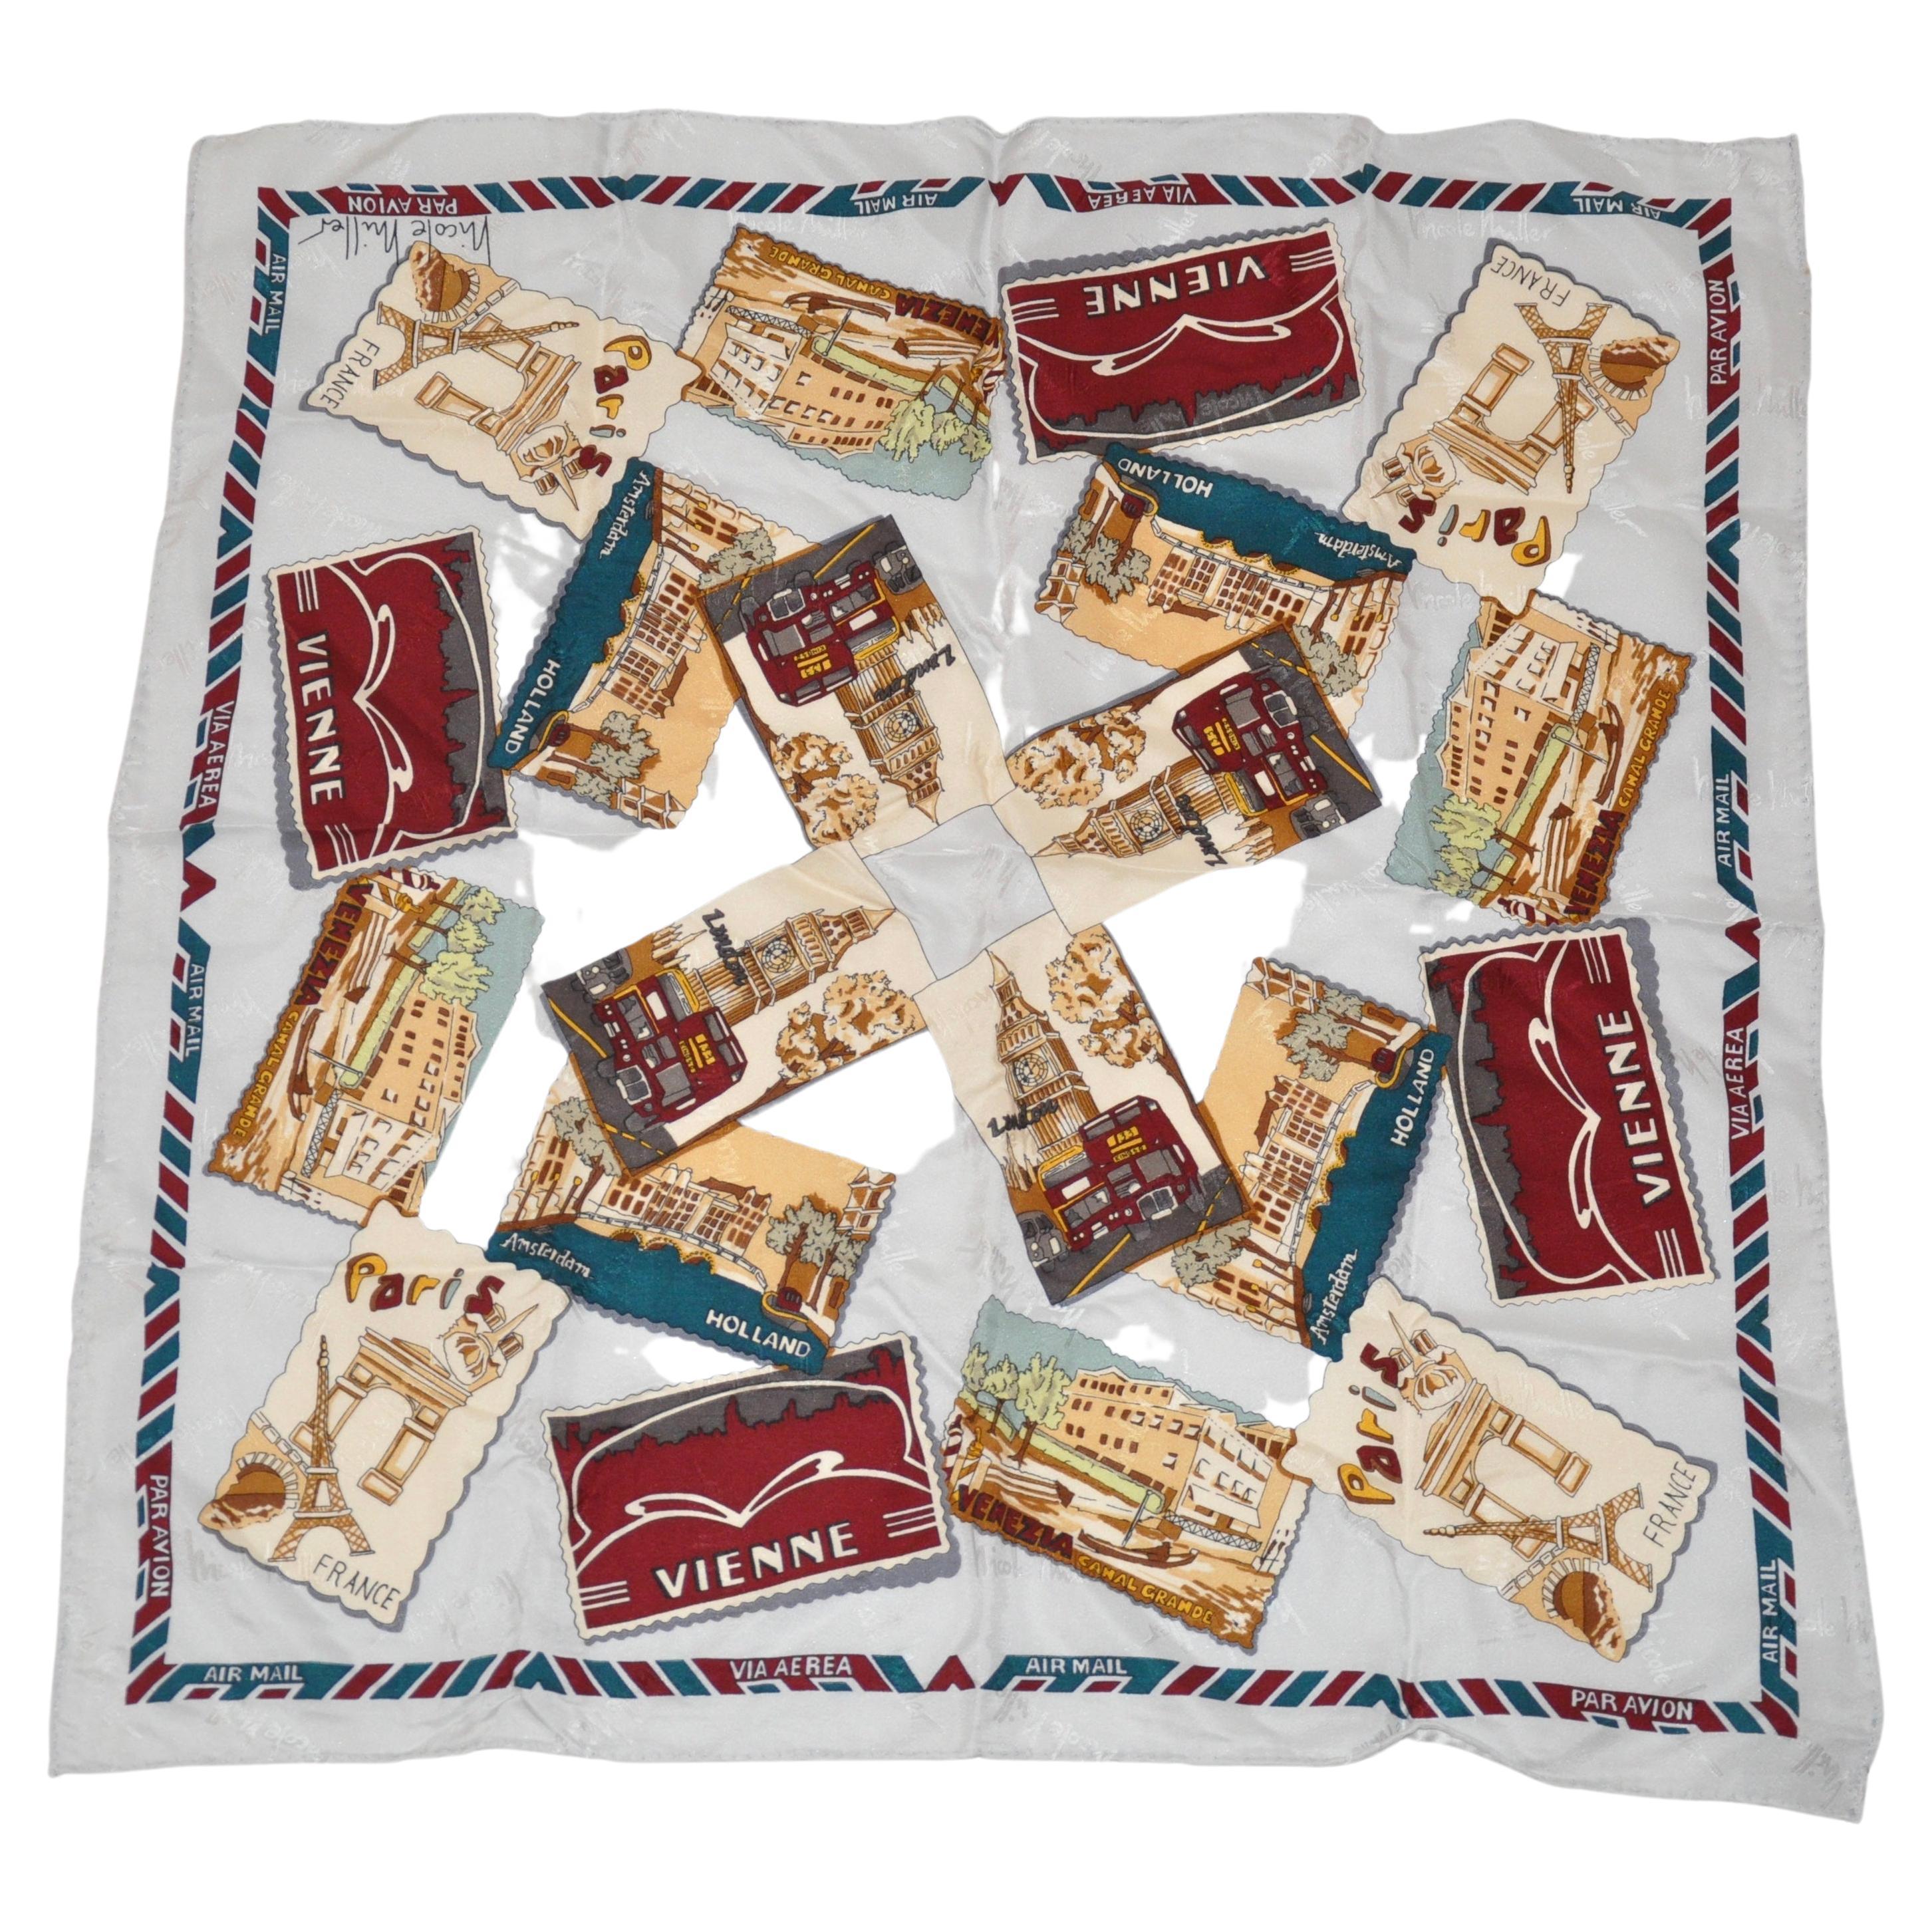 Nicole Miller "Limited Edition" "Airmail From Europe" Silk Scarf.